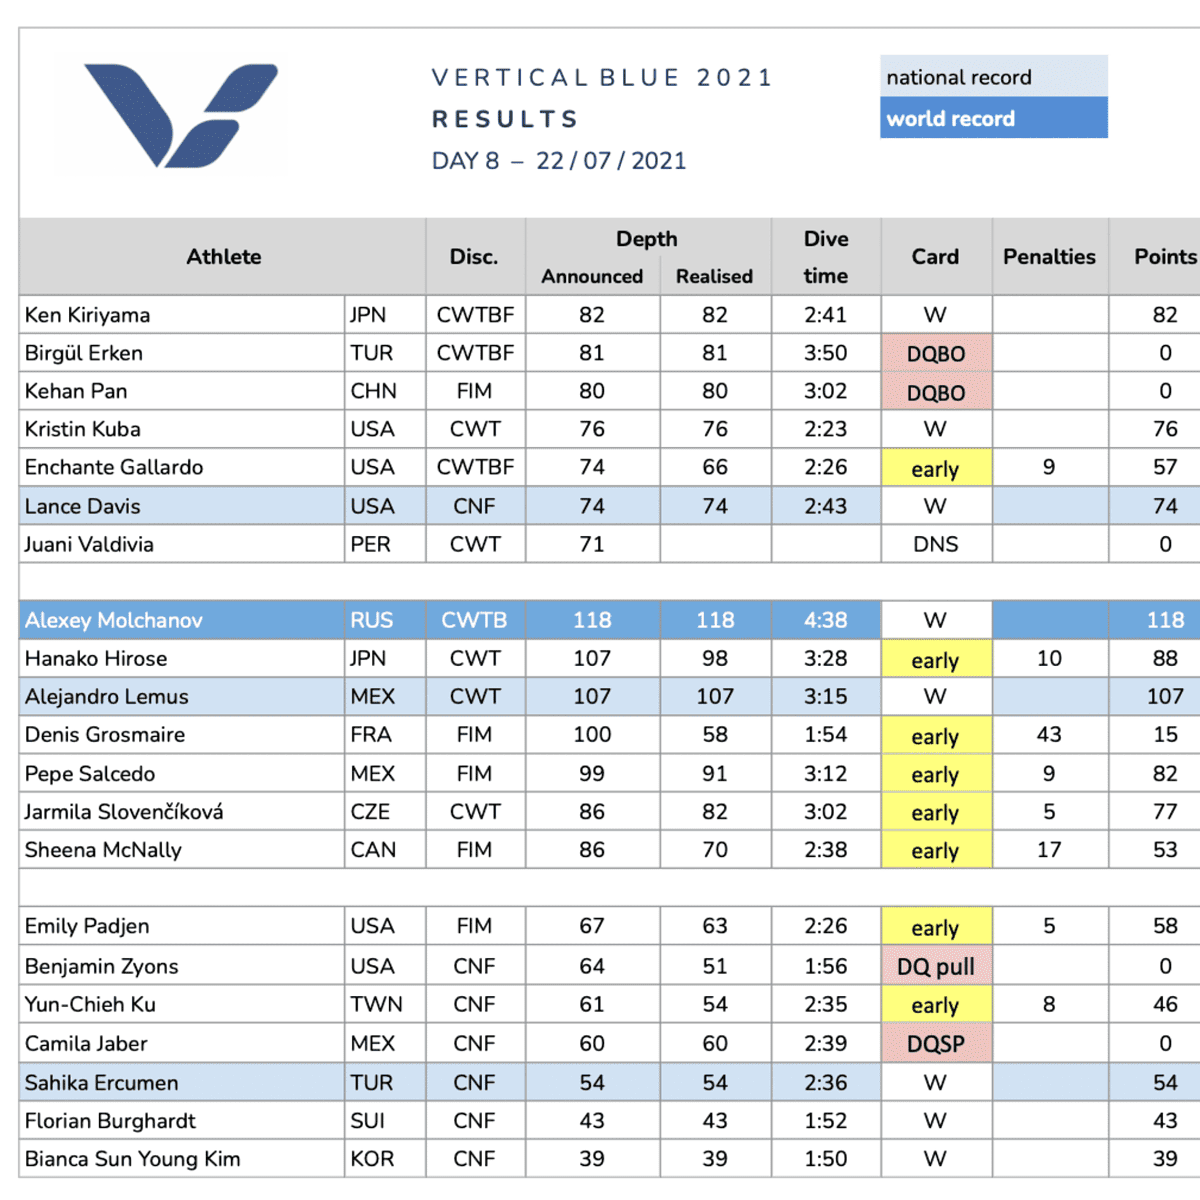 2021 Vertical Blue Day 8 Results